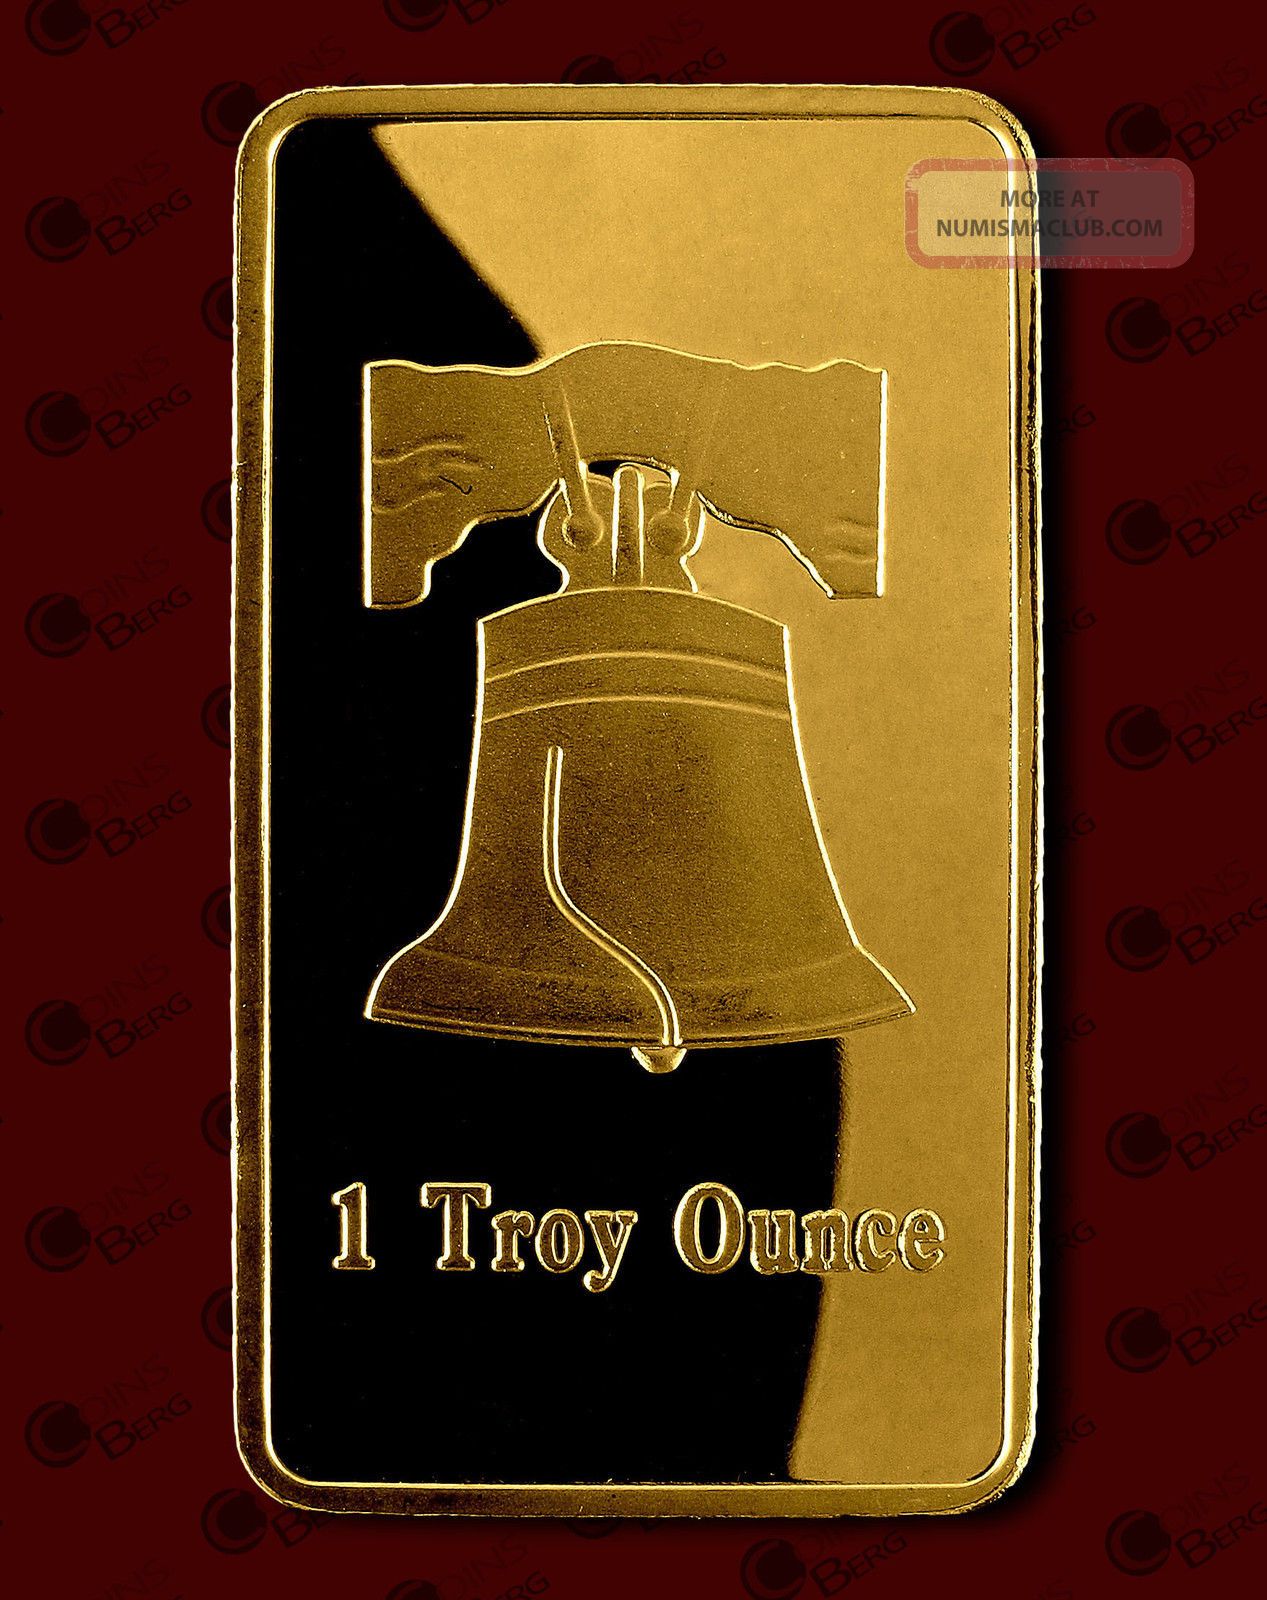 Bells,  1 Troy Ounce,  1 Oz,  Gold Plated Bar,  Clad,  Commemorative Coins: World photo